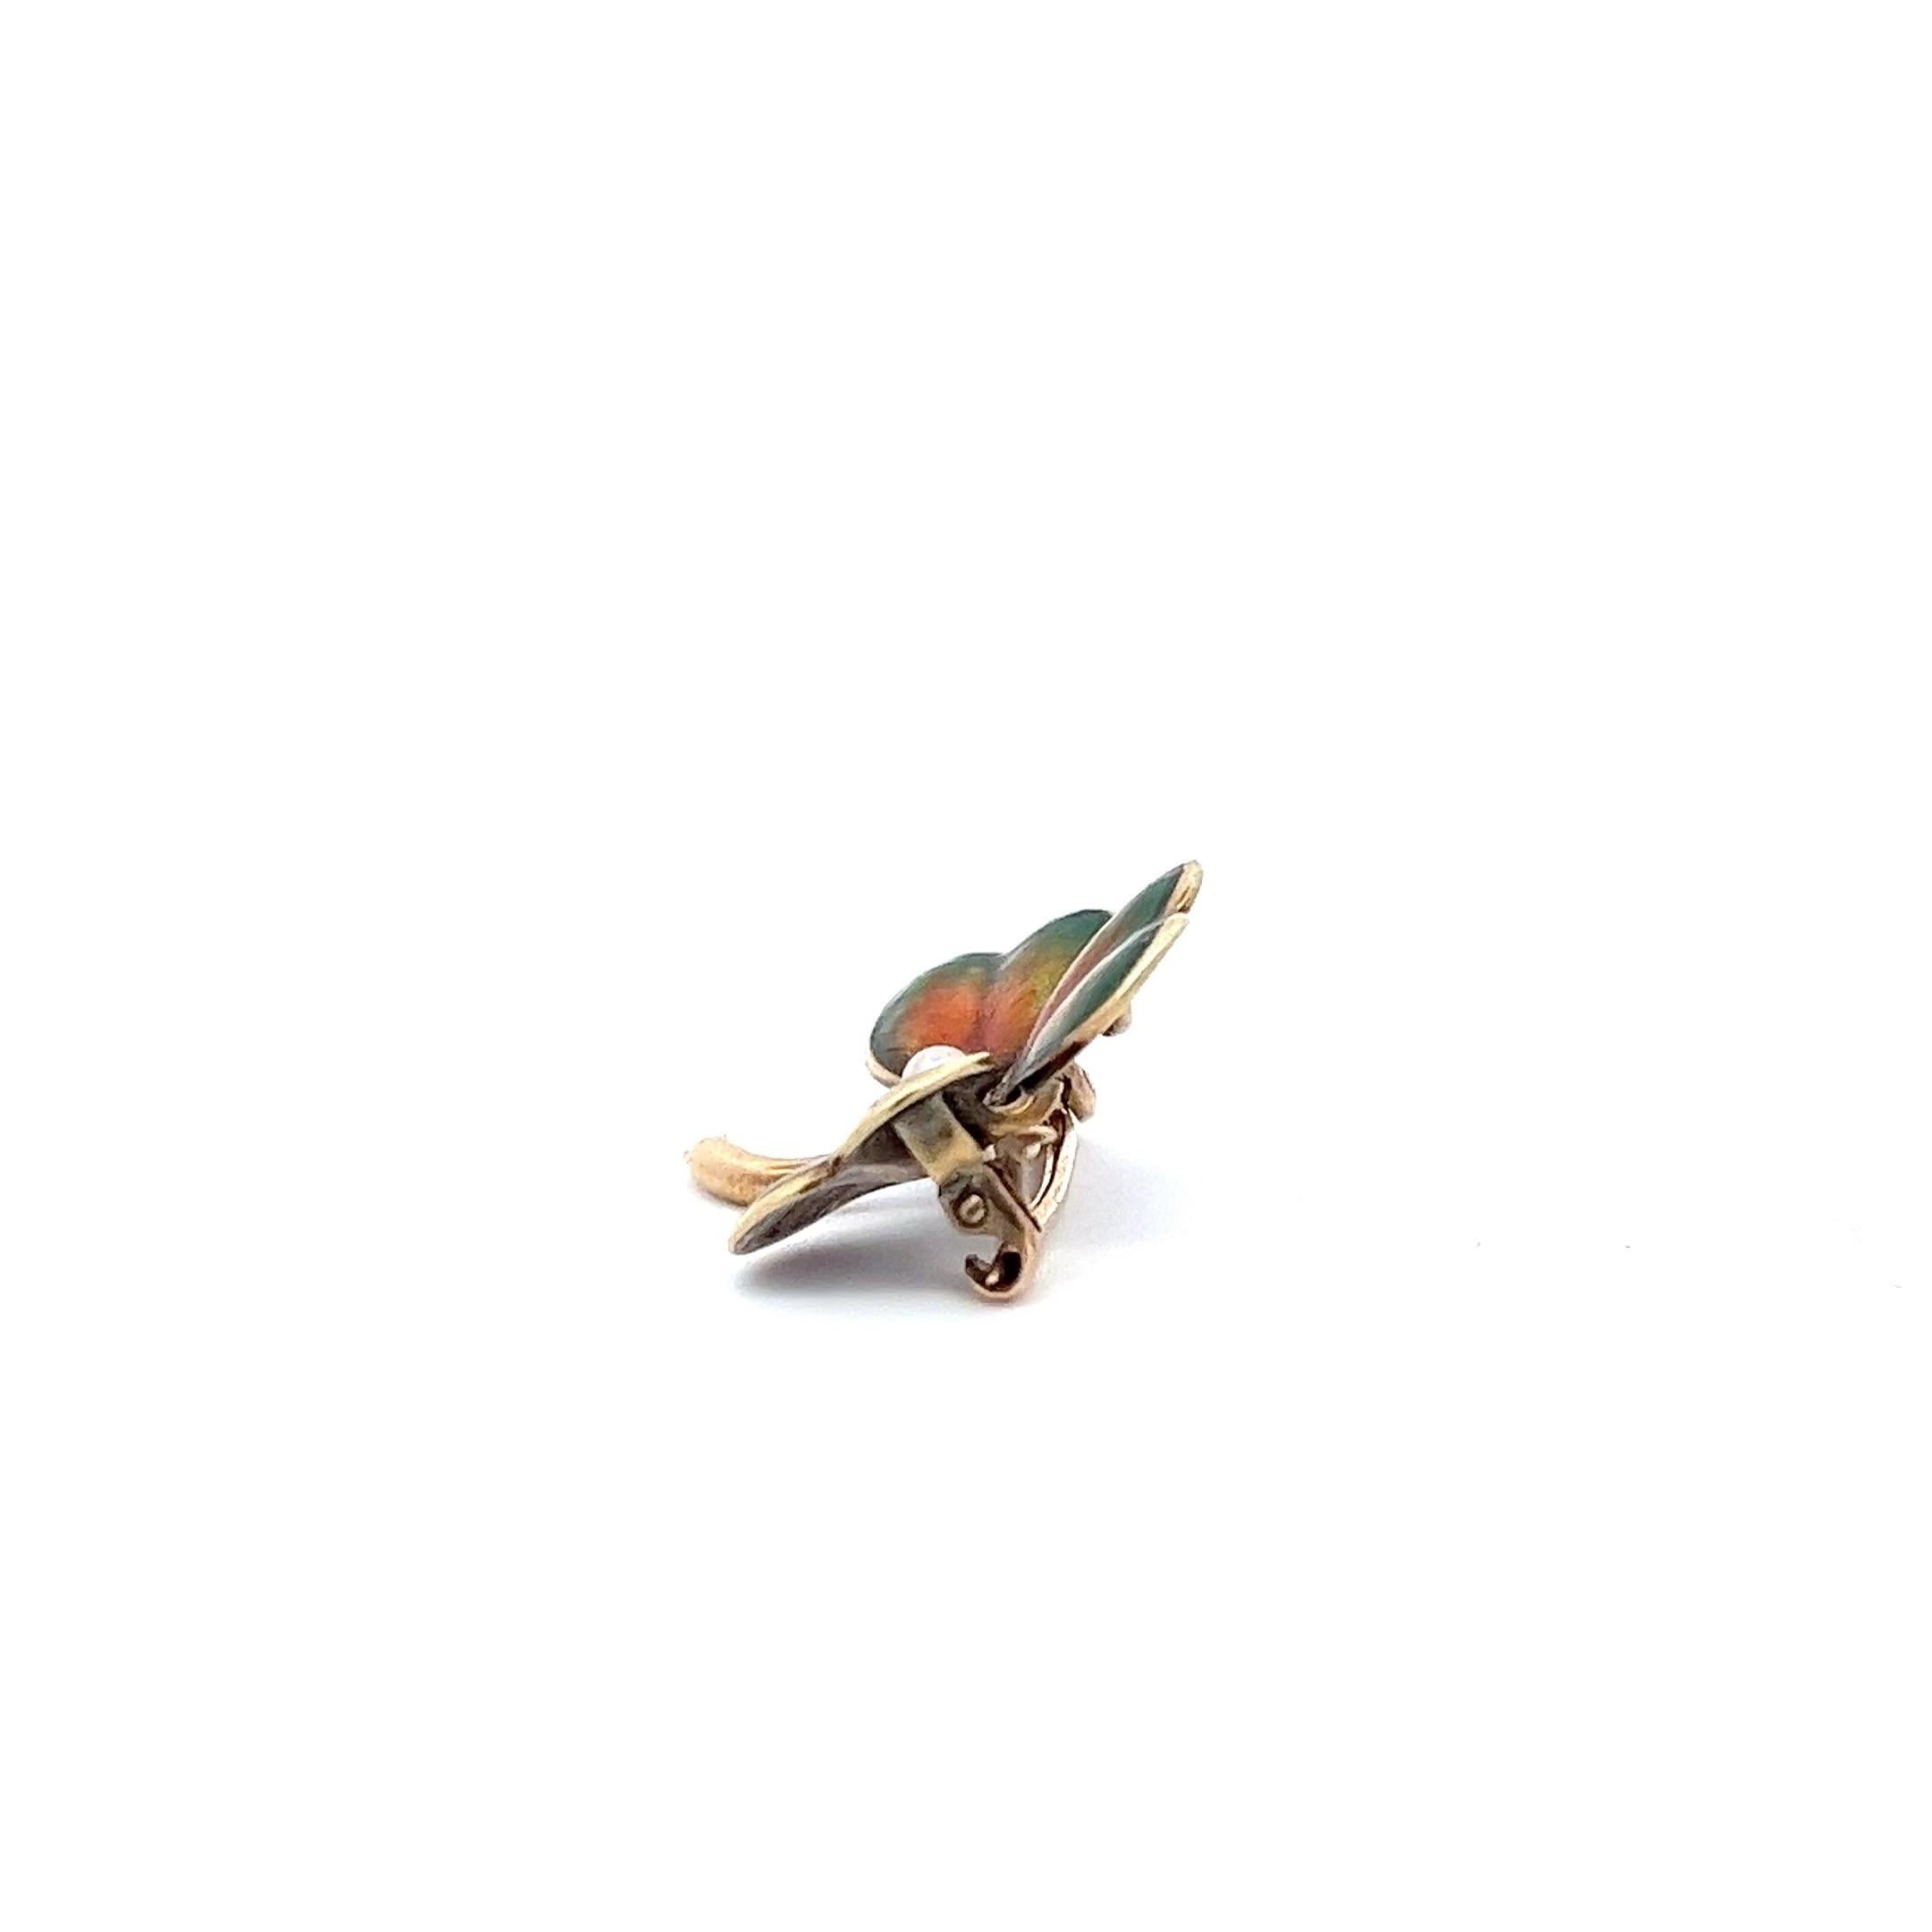 An exquisite example of Art Nouveau design, this clover-shaped brooch features a lustrous central pearl nestled among leaves detailed with a rich enamel palette. The skillful application of the enamel creates a seamless gradient of reds, greens, and